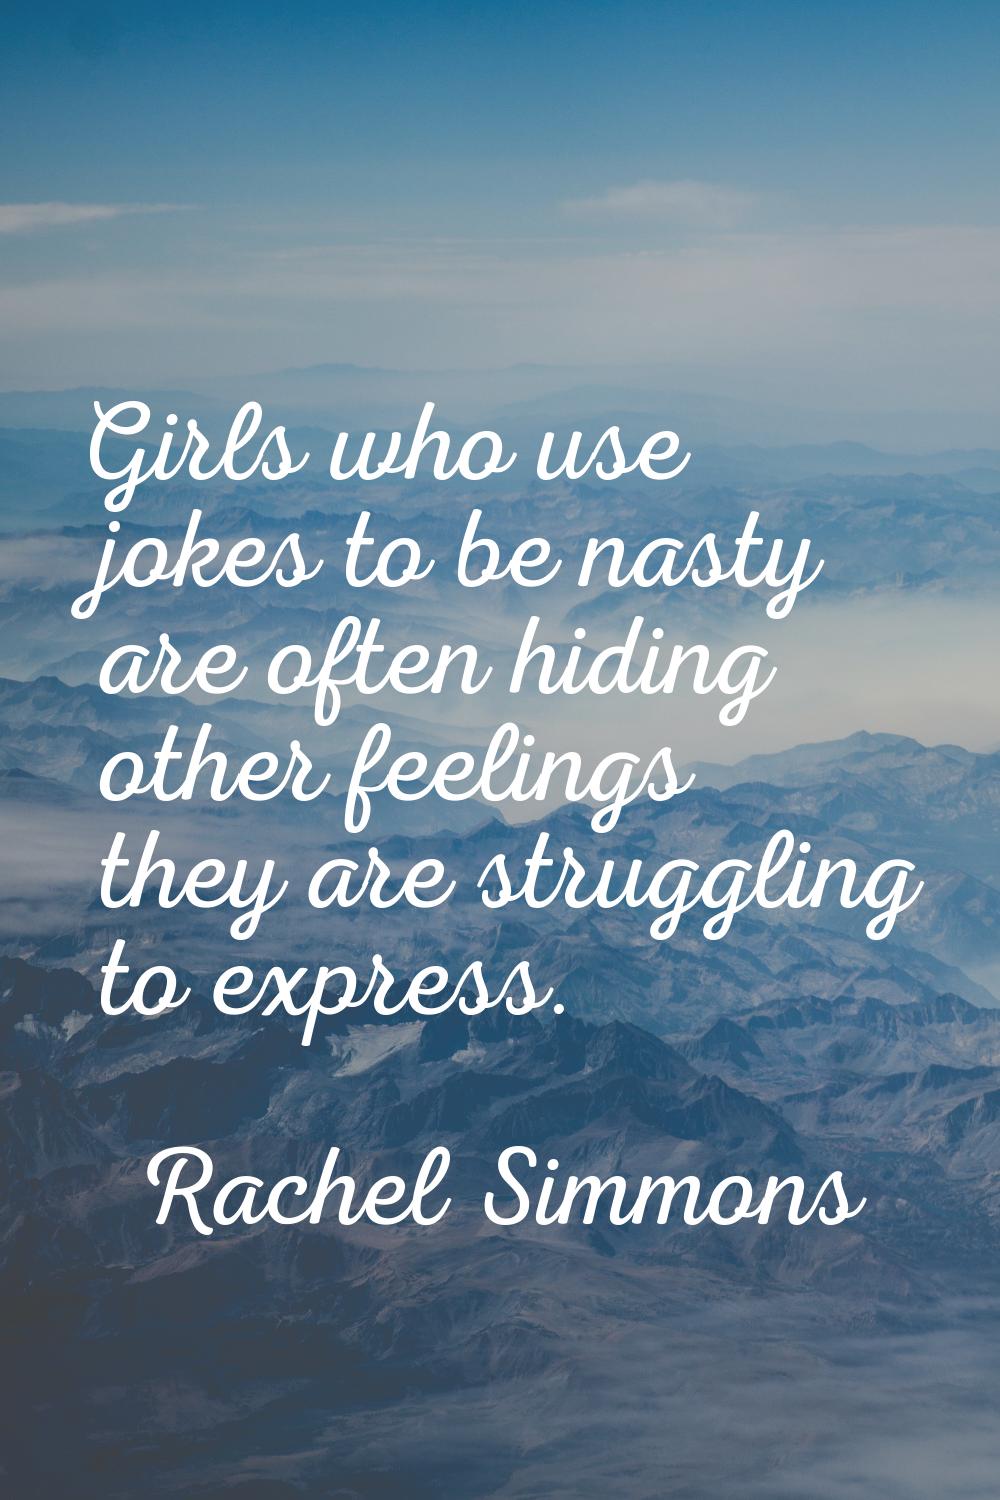 Girls who use jokes to be nasty are often hiding other feelings they are struggling to express.